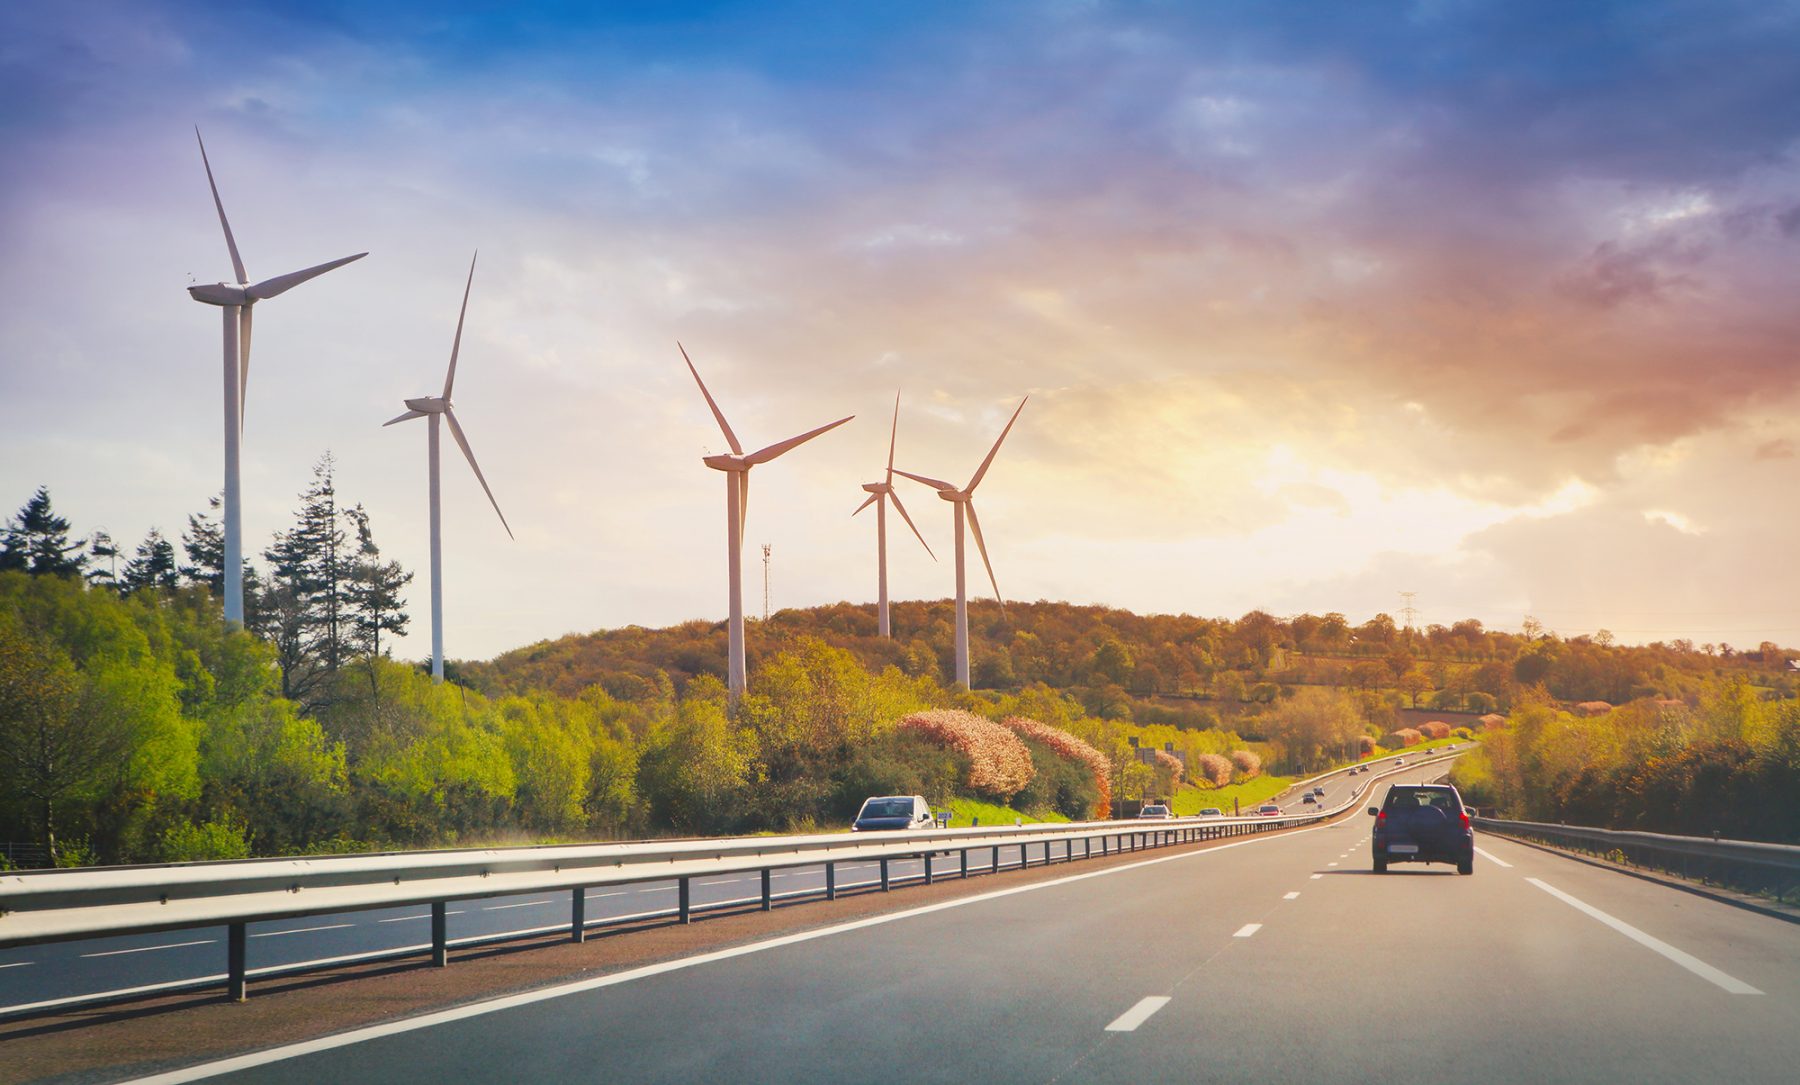 A highway leading towards wind turbines against a backdrop of a colorful sky and lush greenery.